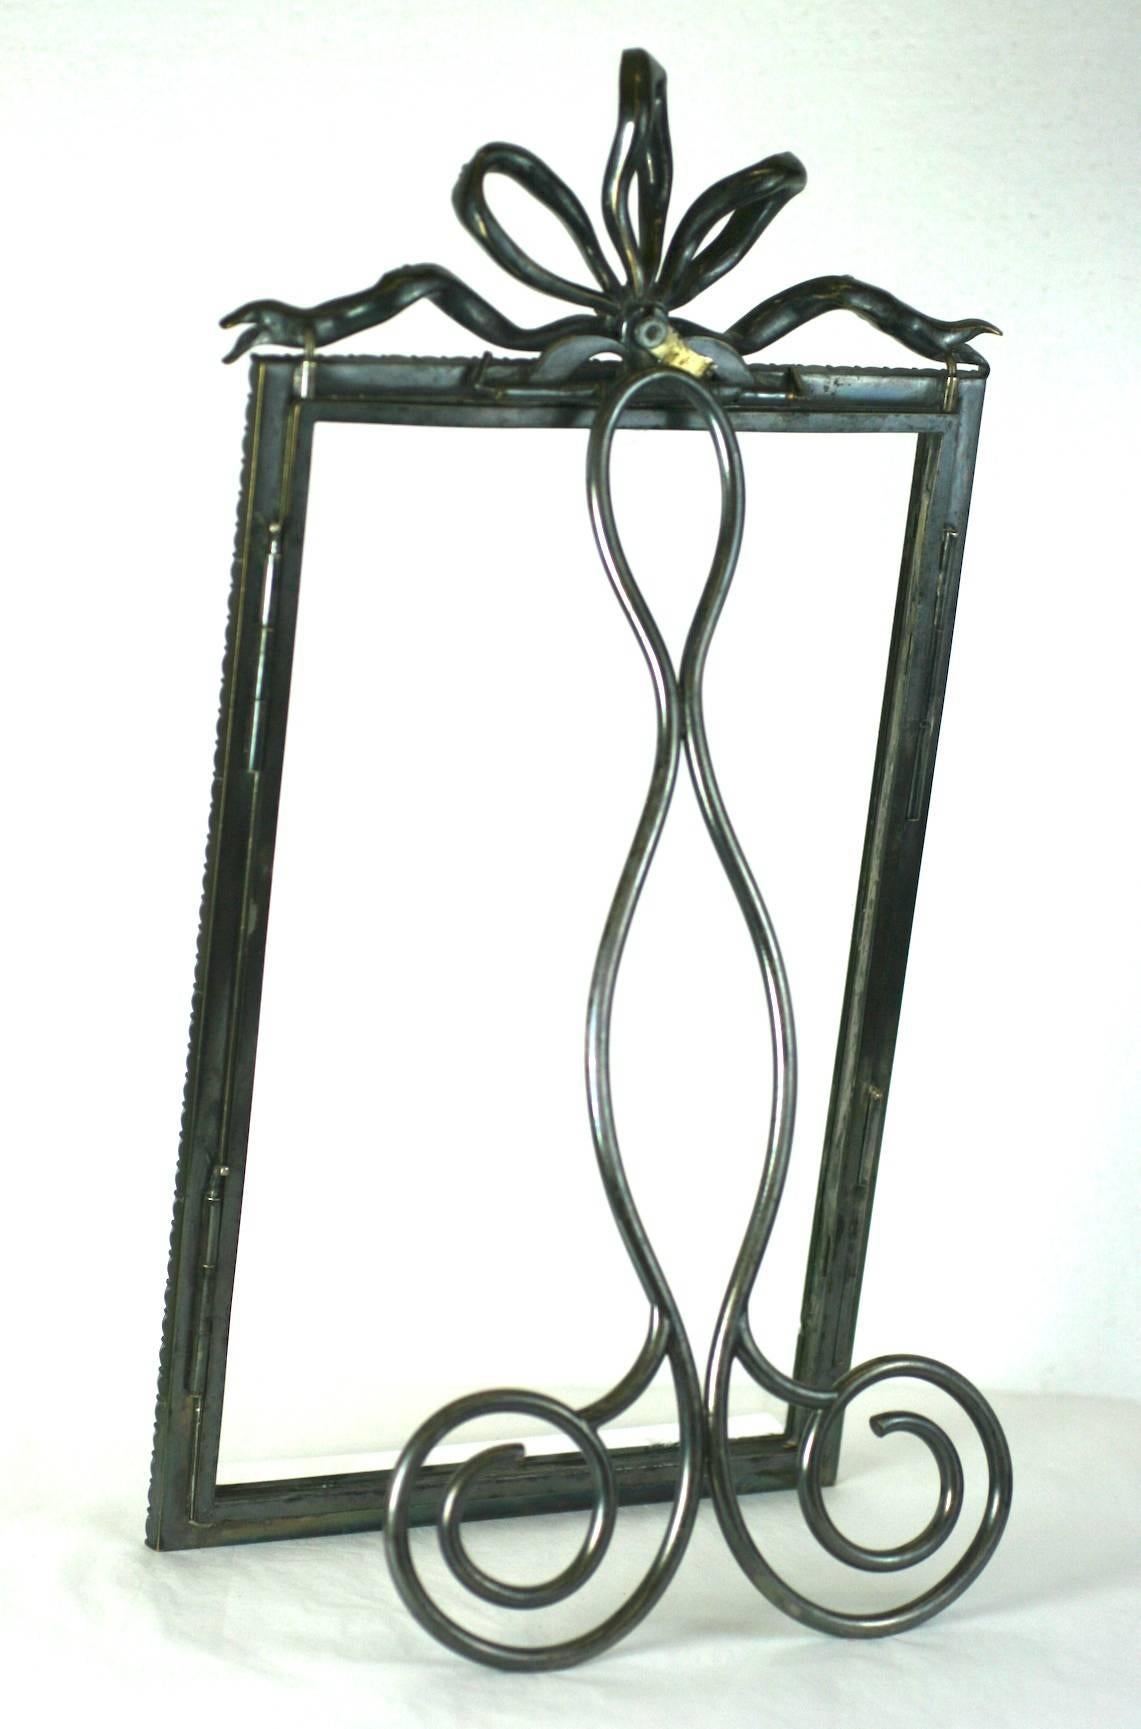 Wonderful and rare Victorian paste set frame from the mid-late 19th century. An extraordinary and massive piece of 